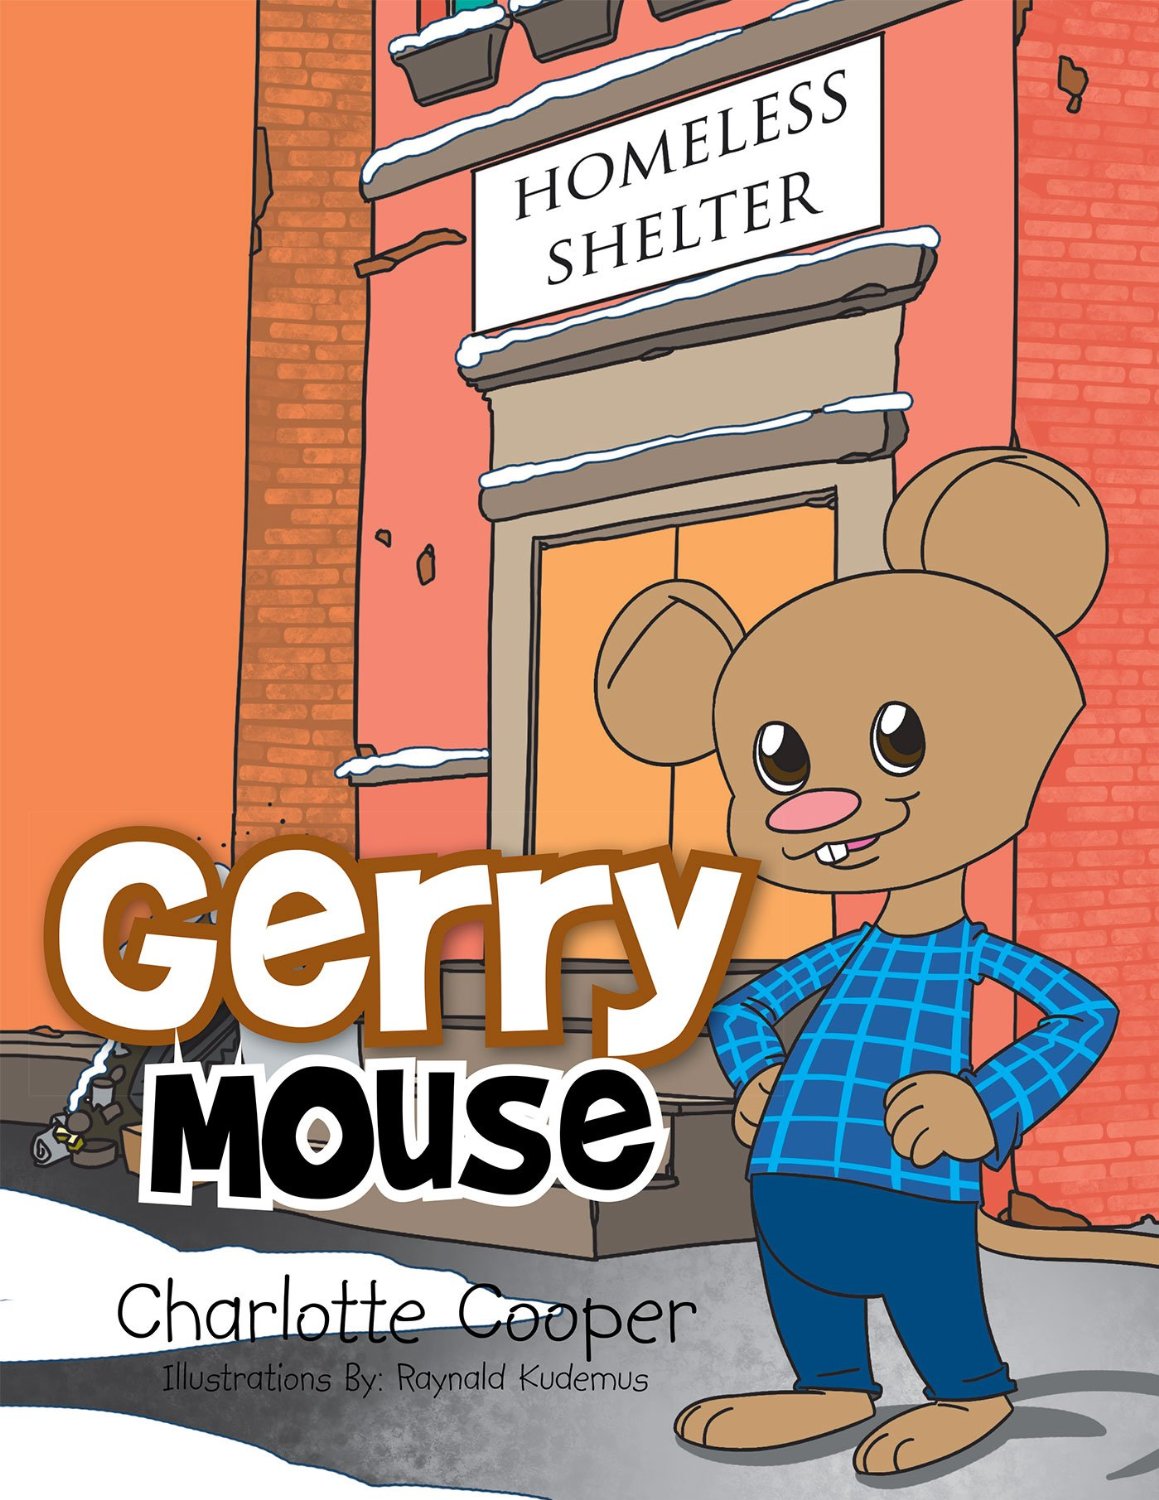 Gerry Mouse by Charlotte Cooper Book Review